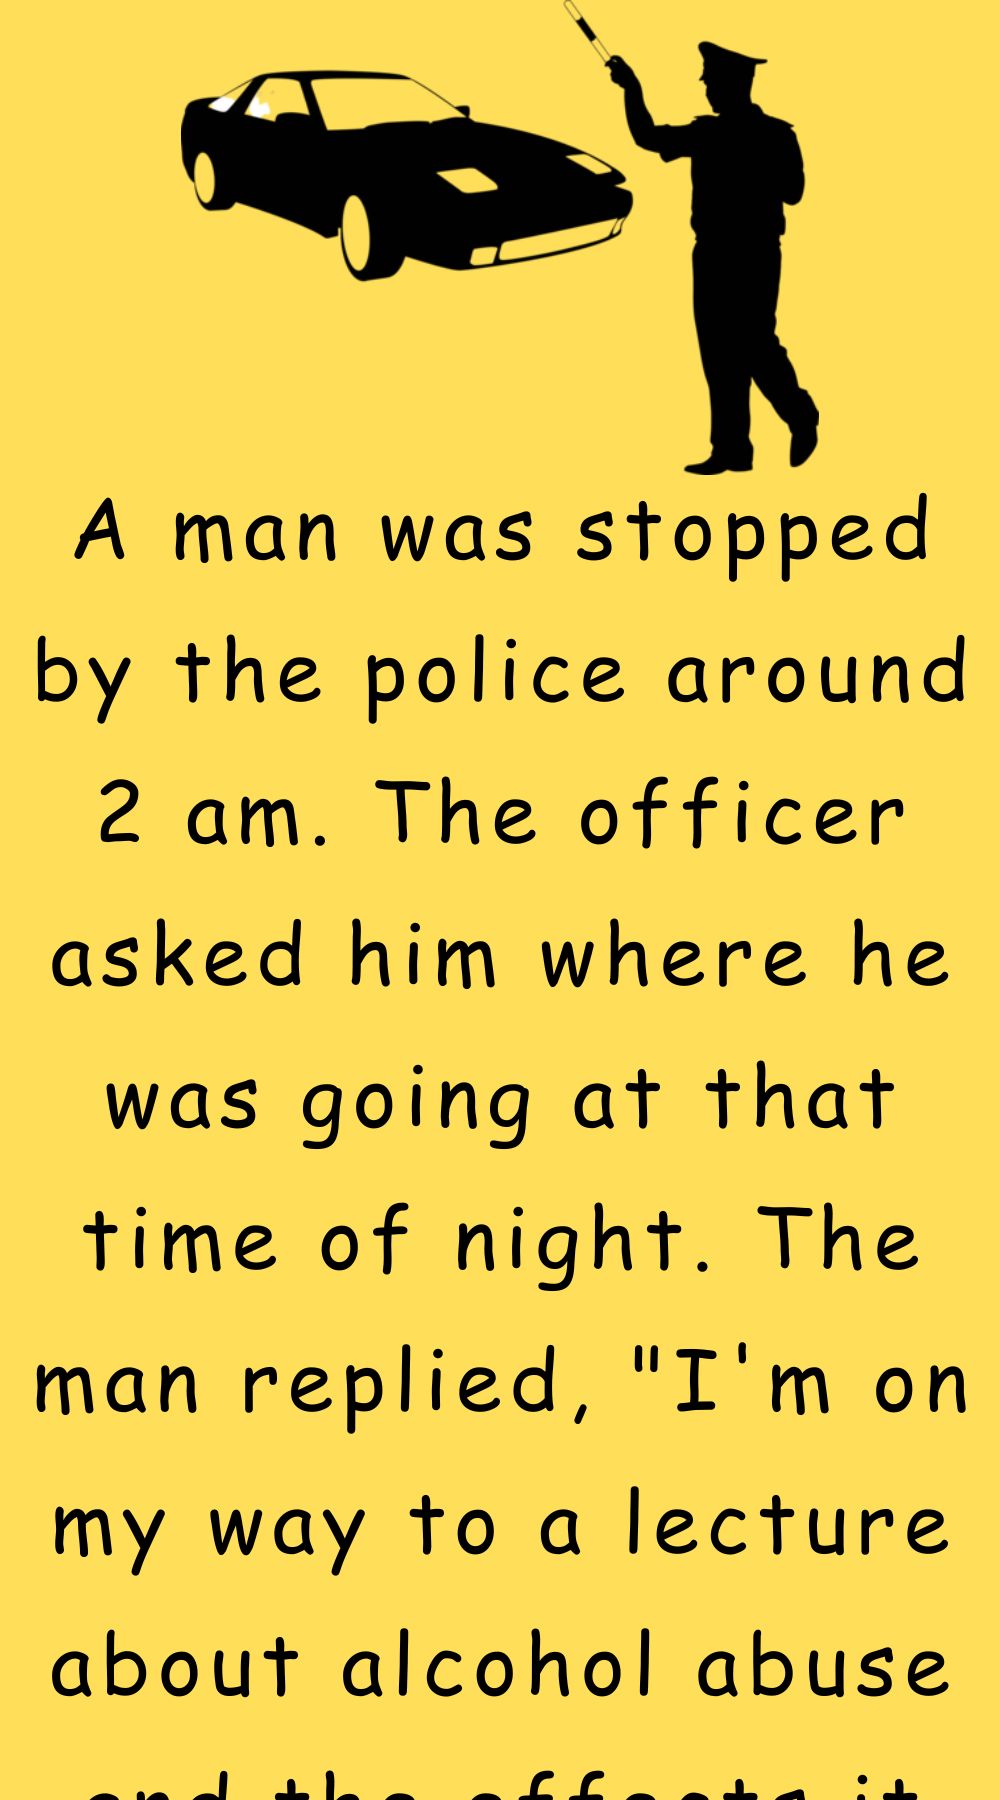 A man was stopped by the police around 2 am 